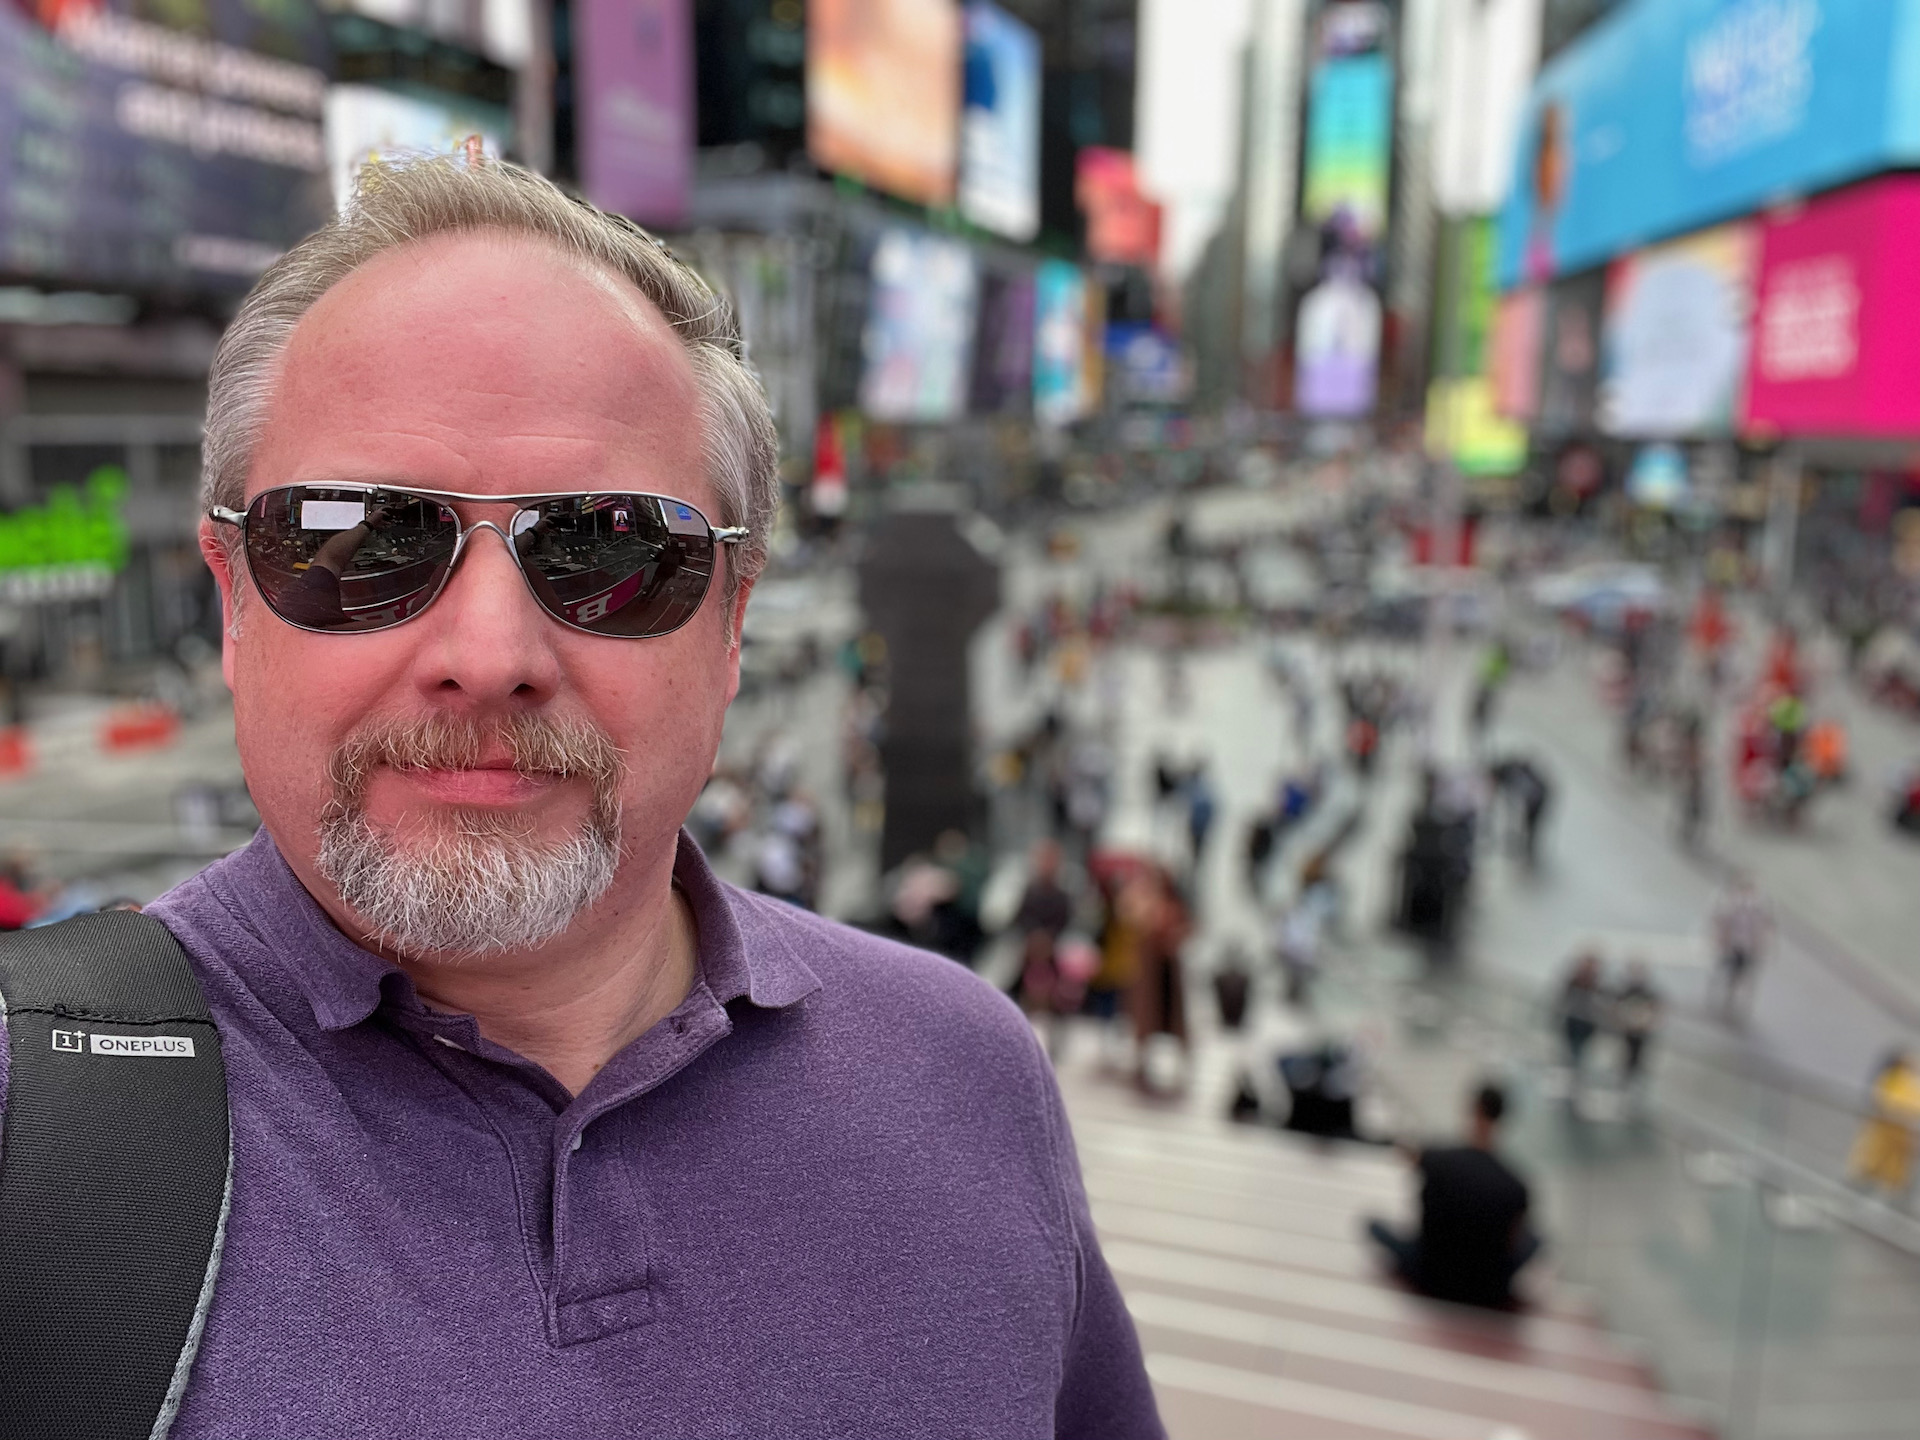 Apple iphone 13 photo sample times square portrait of a man with light colored hair and beard wearing a purple top and black shades